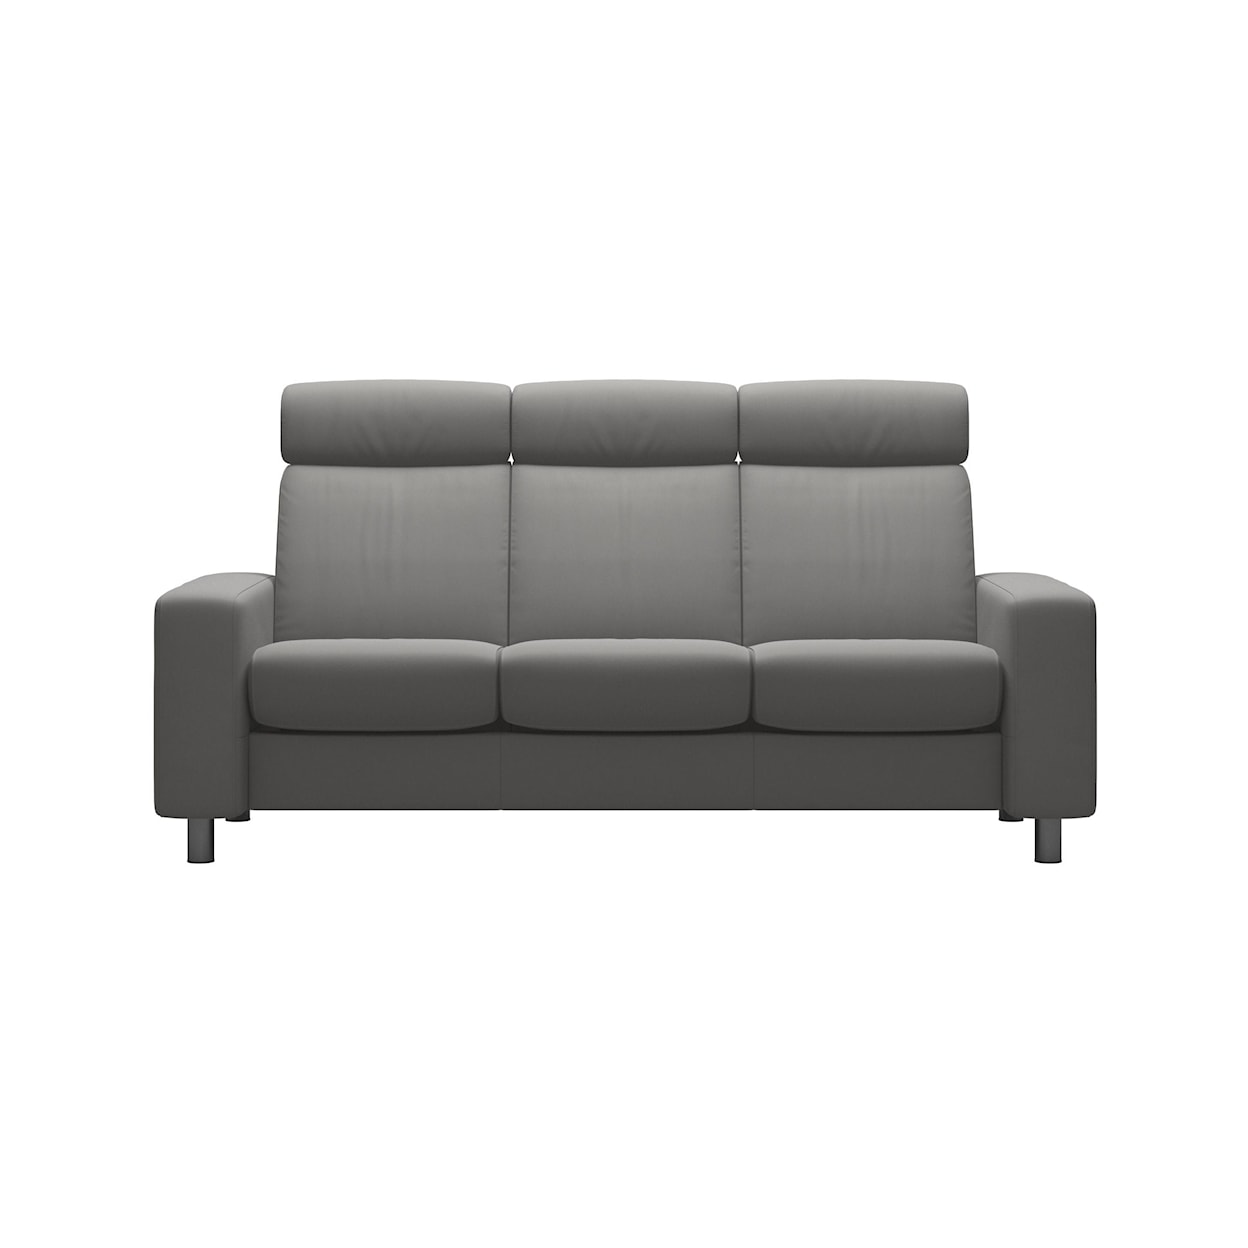 Stressless by Ekornes Arion 19 - A20 High-Back Reclining Sofa